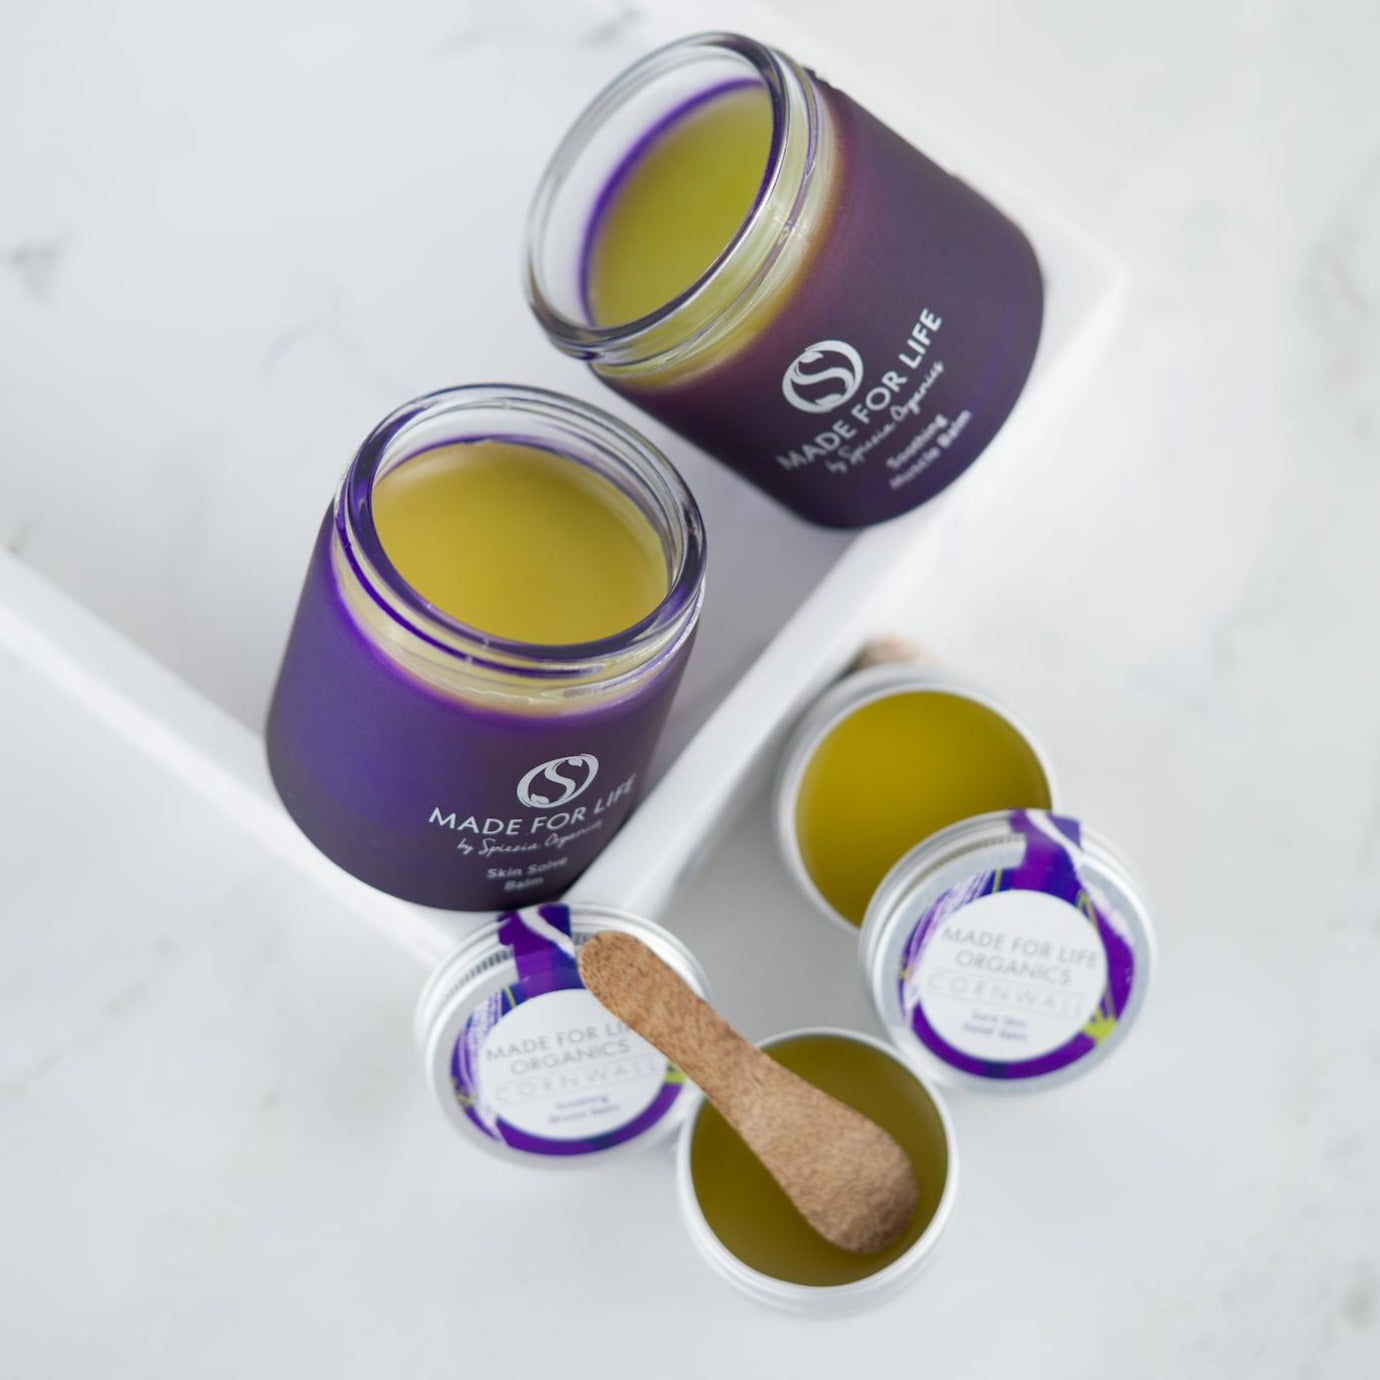 yellow balm in purple jars for Made For Life ORganics First Aid Kit balms